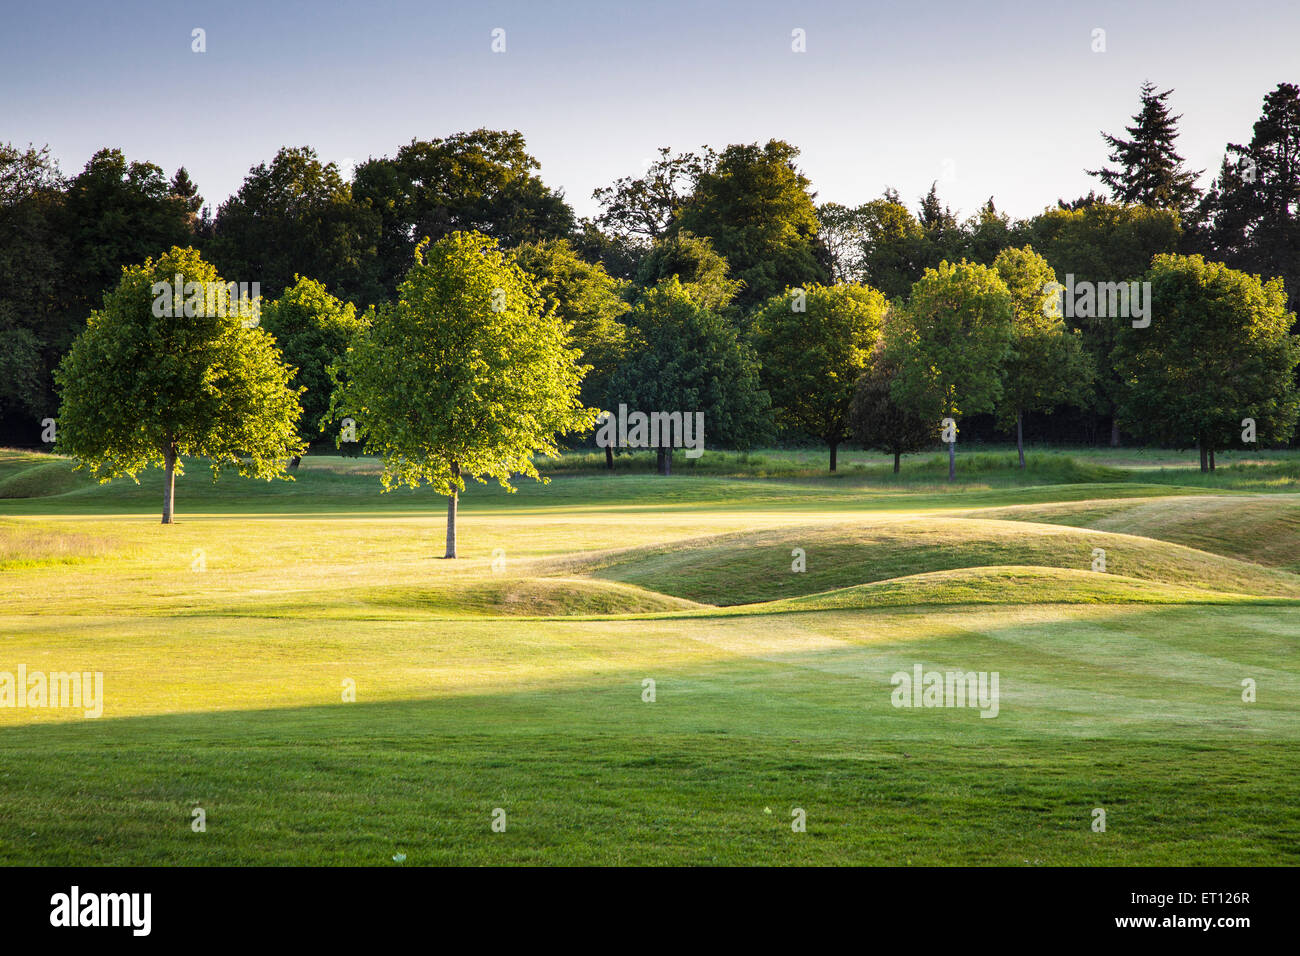 A bunker on a typical golf course in early morning sunshine. Stock Photo